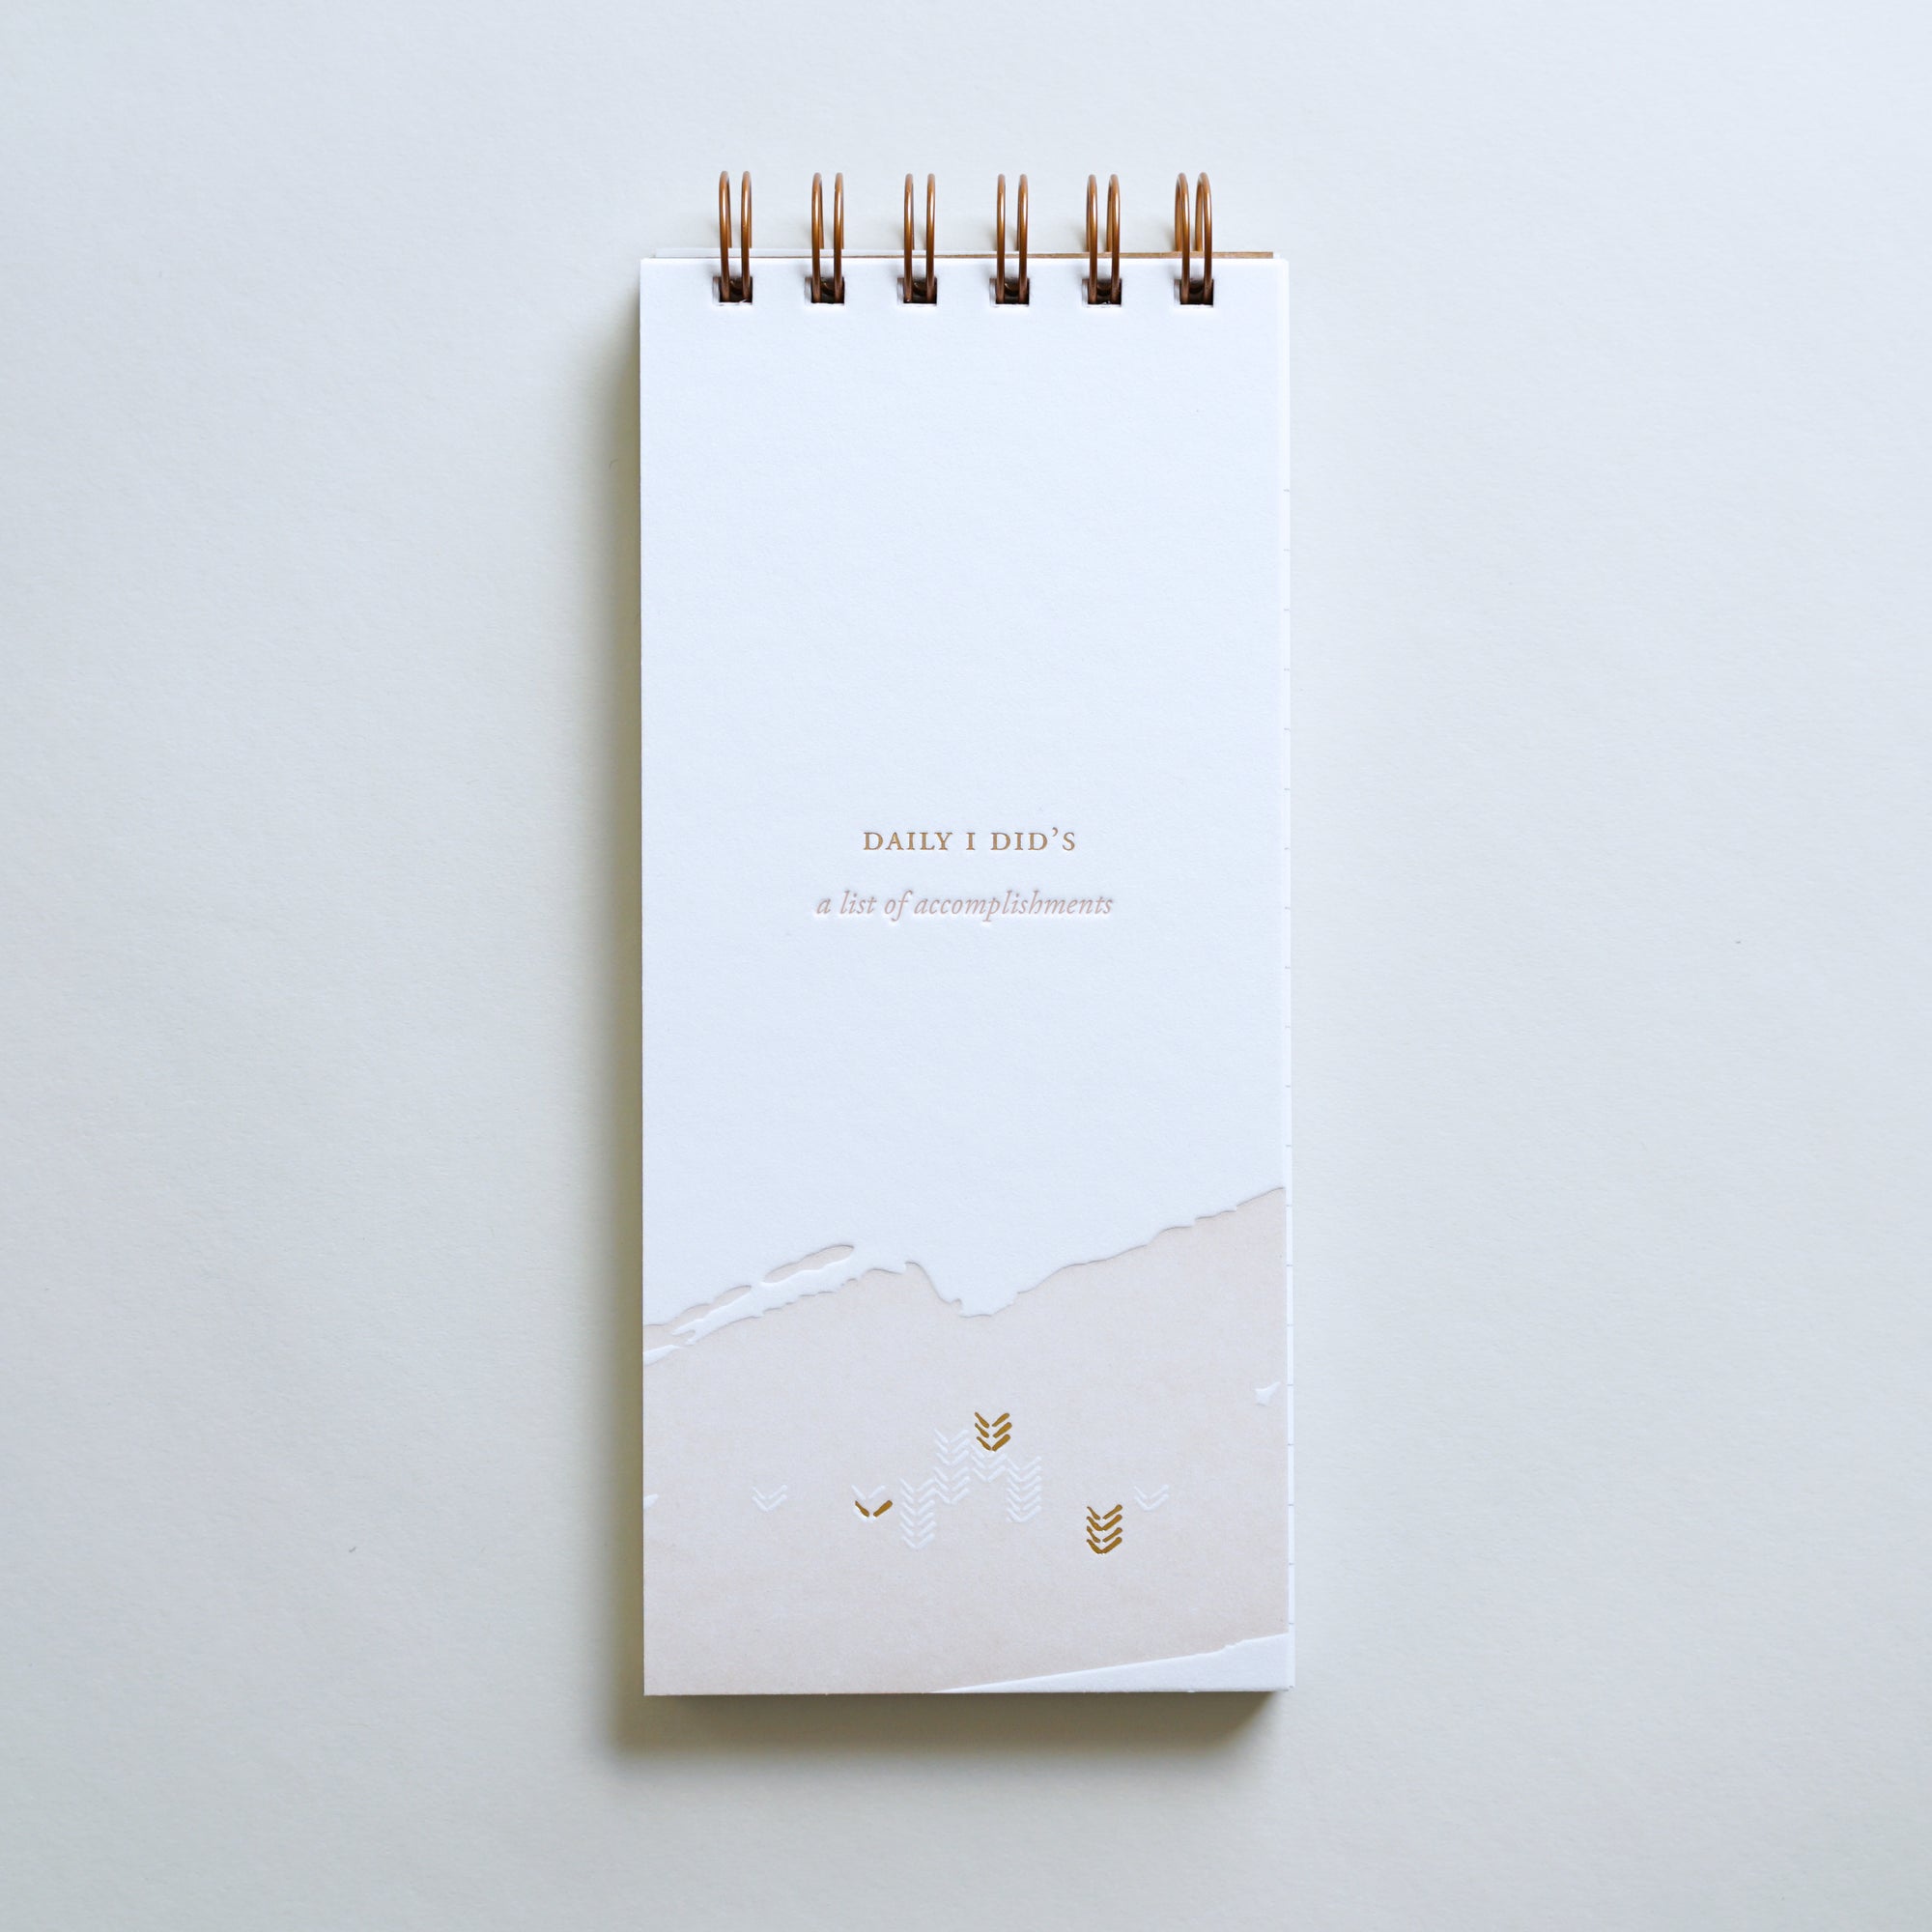 "Daily I Did's" lined notebook, letterpress printed by hand.